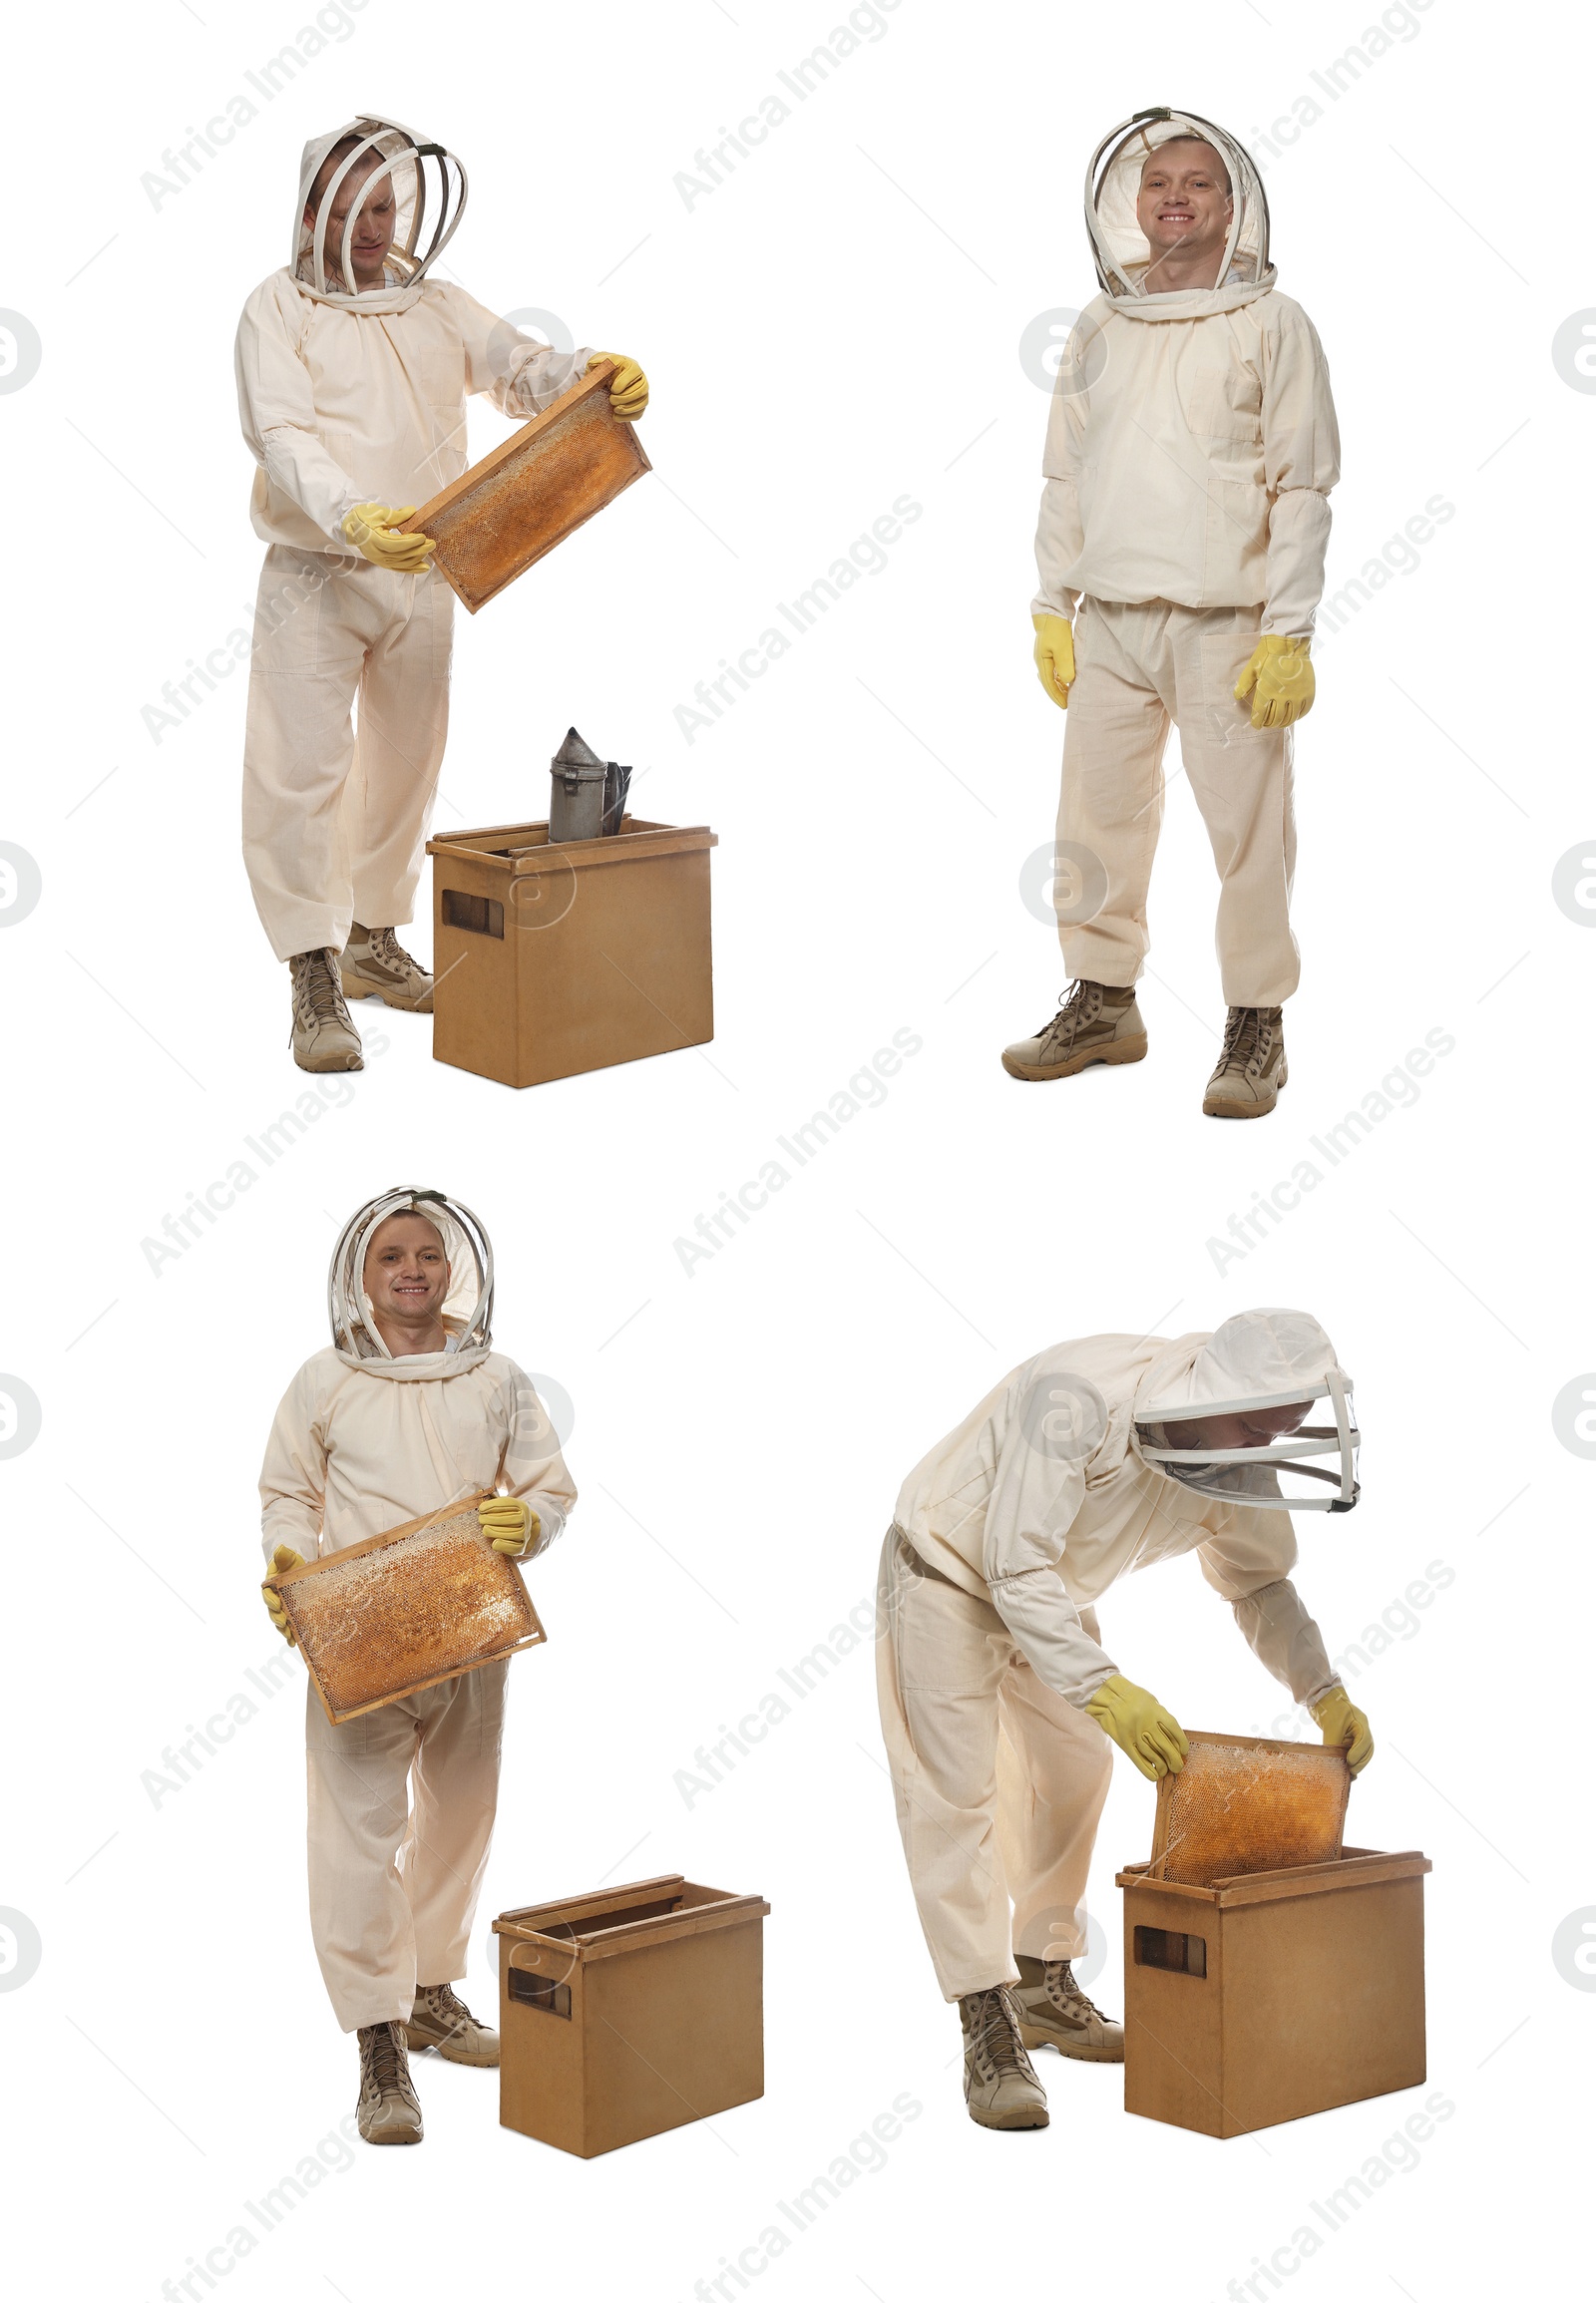 Image of Collage with photos of in uniform holding frames with honeycombs on white background